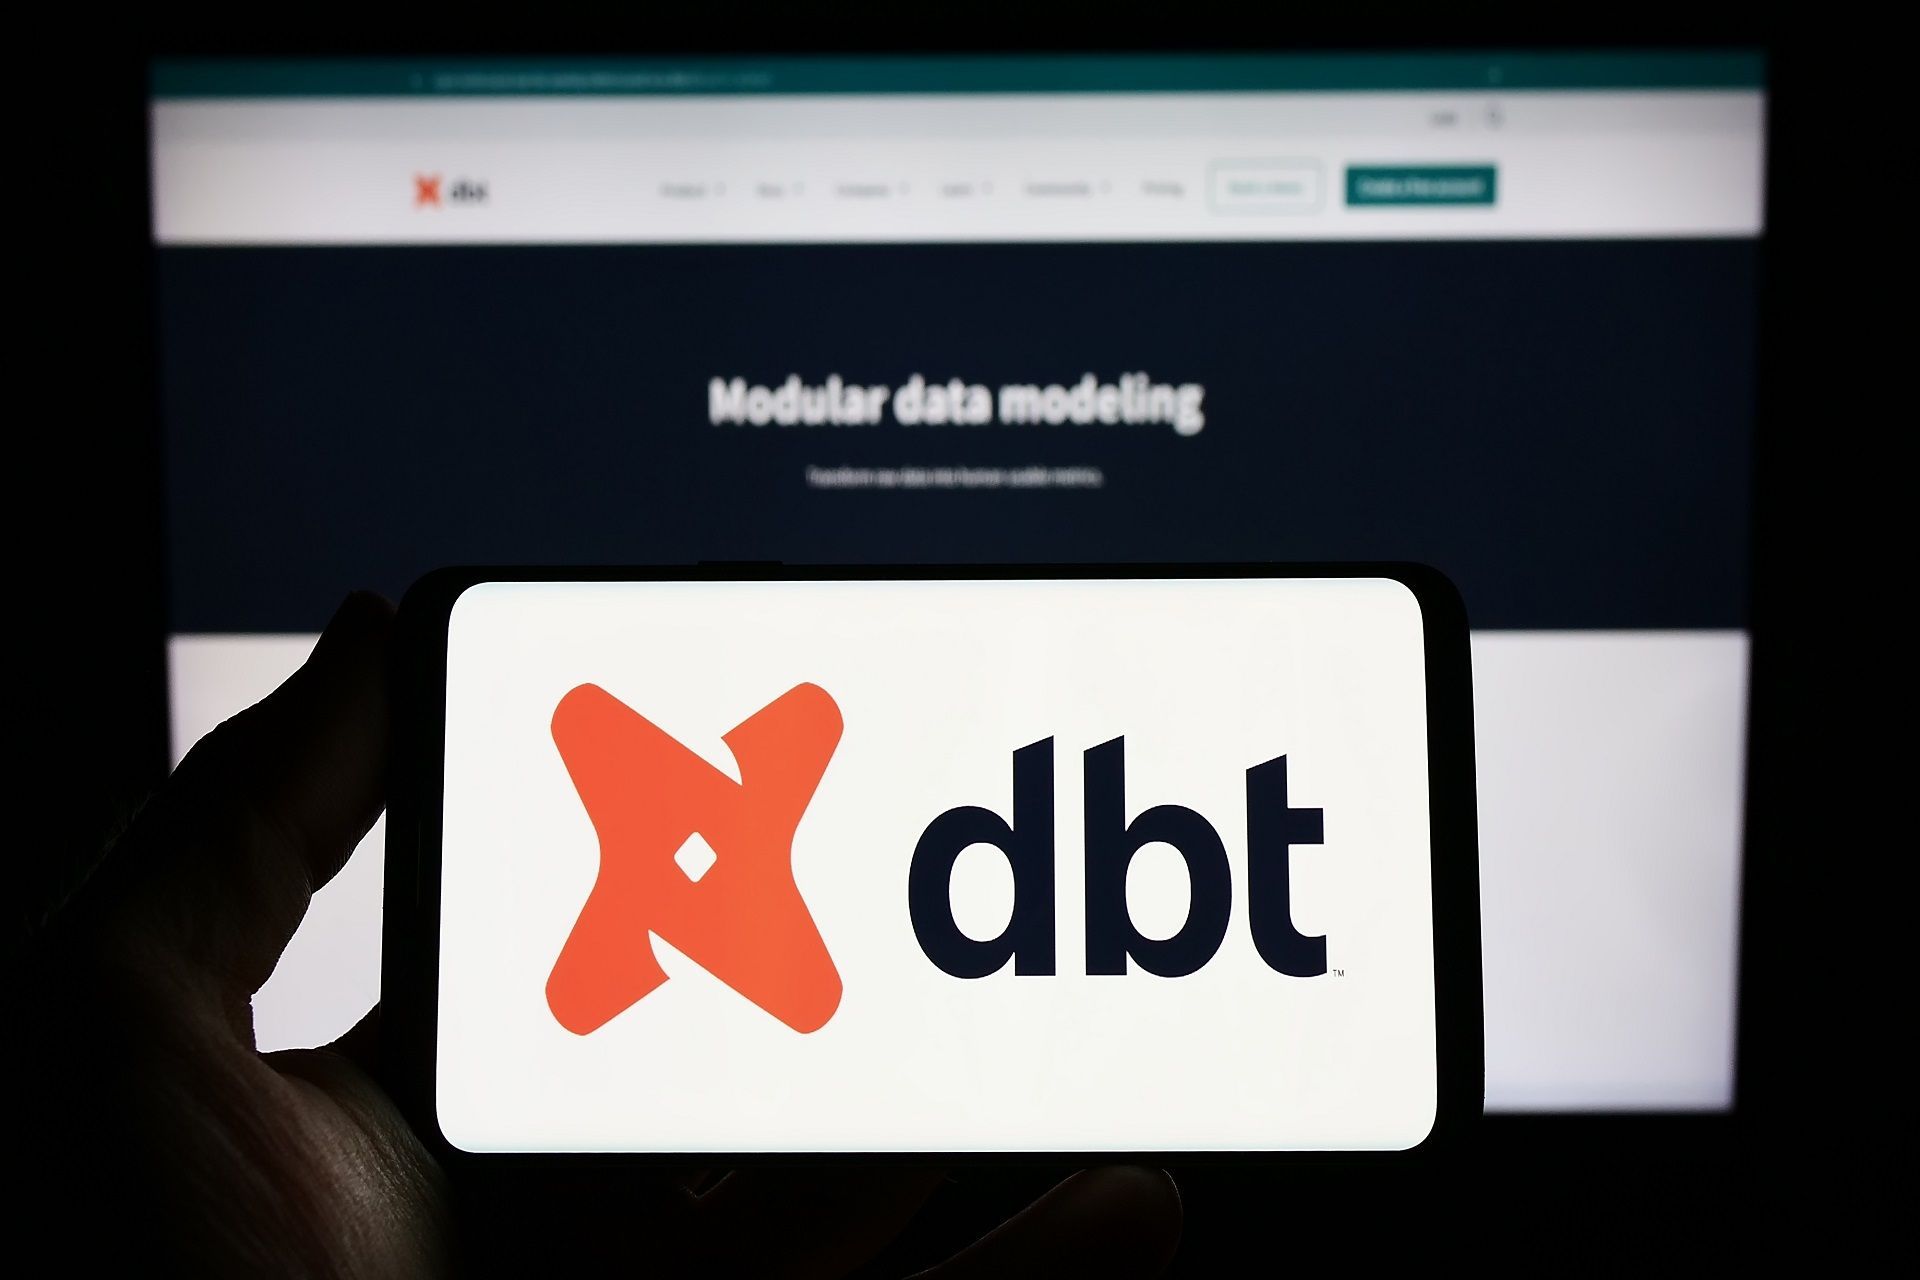 dbt Labs  Transform Data in Your Warehouse